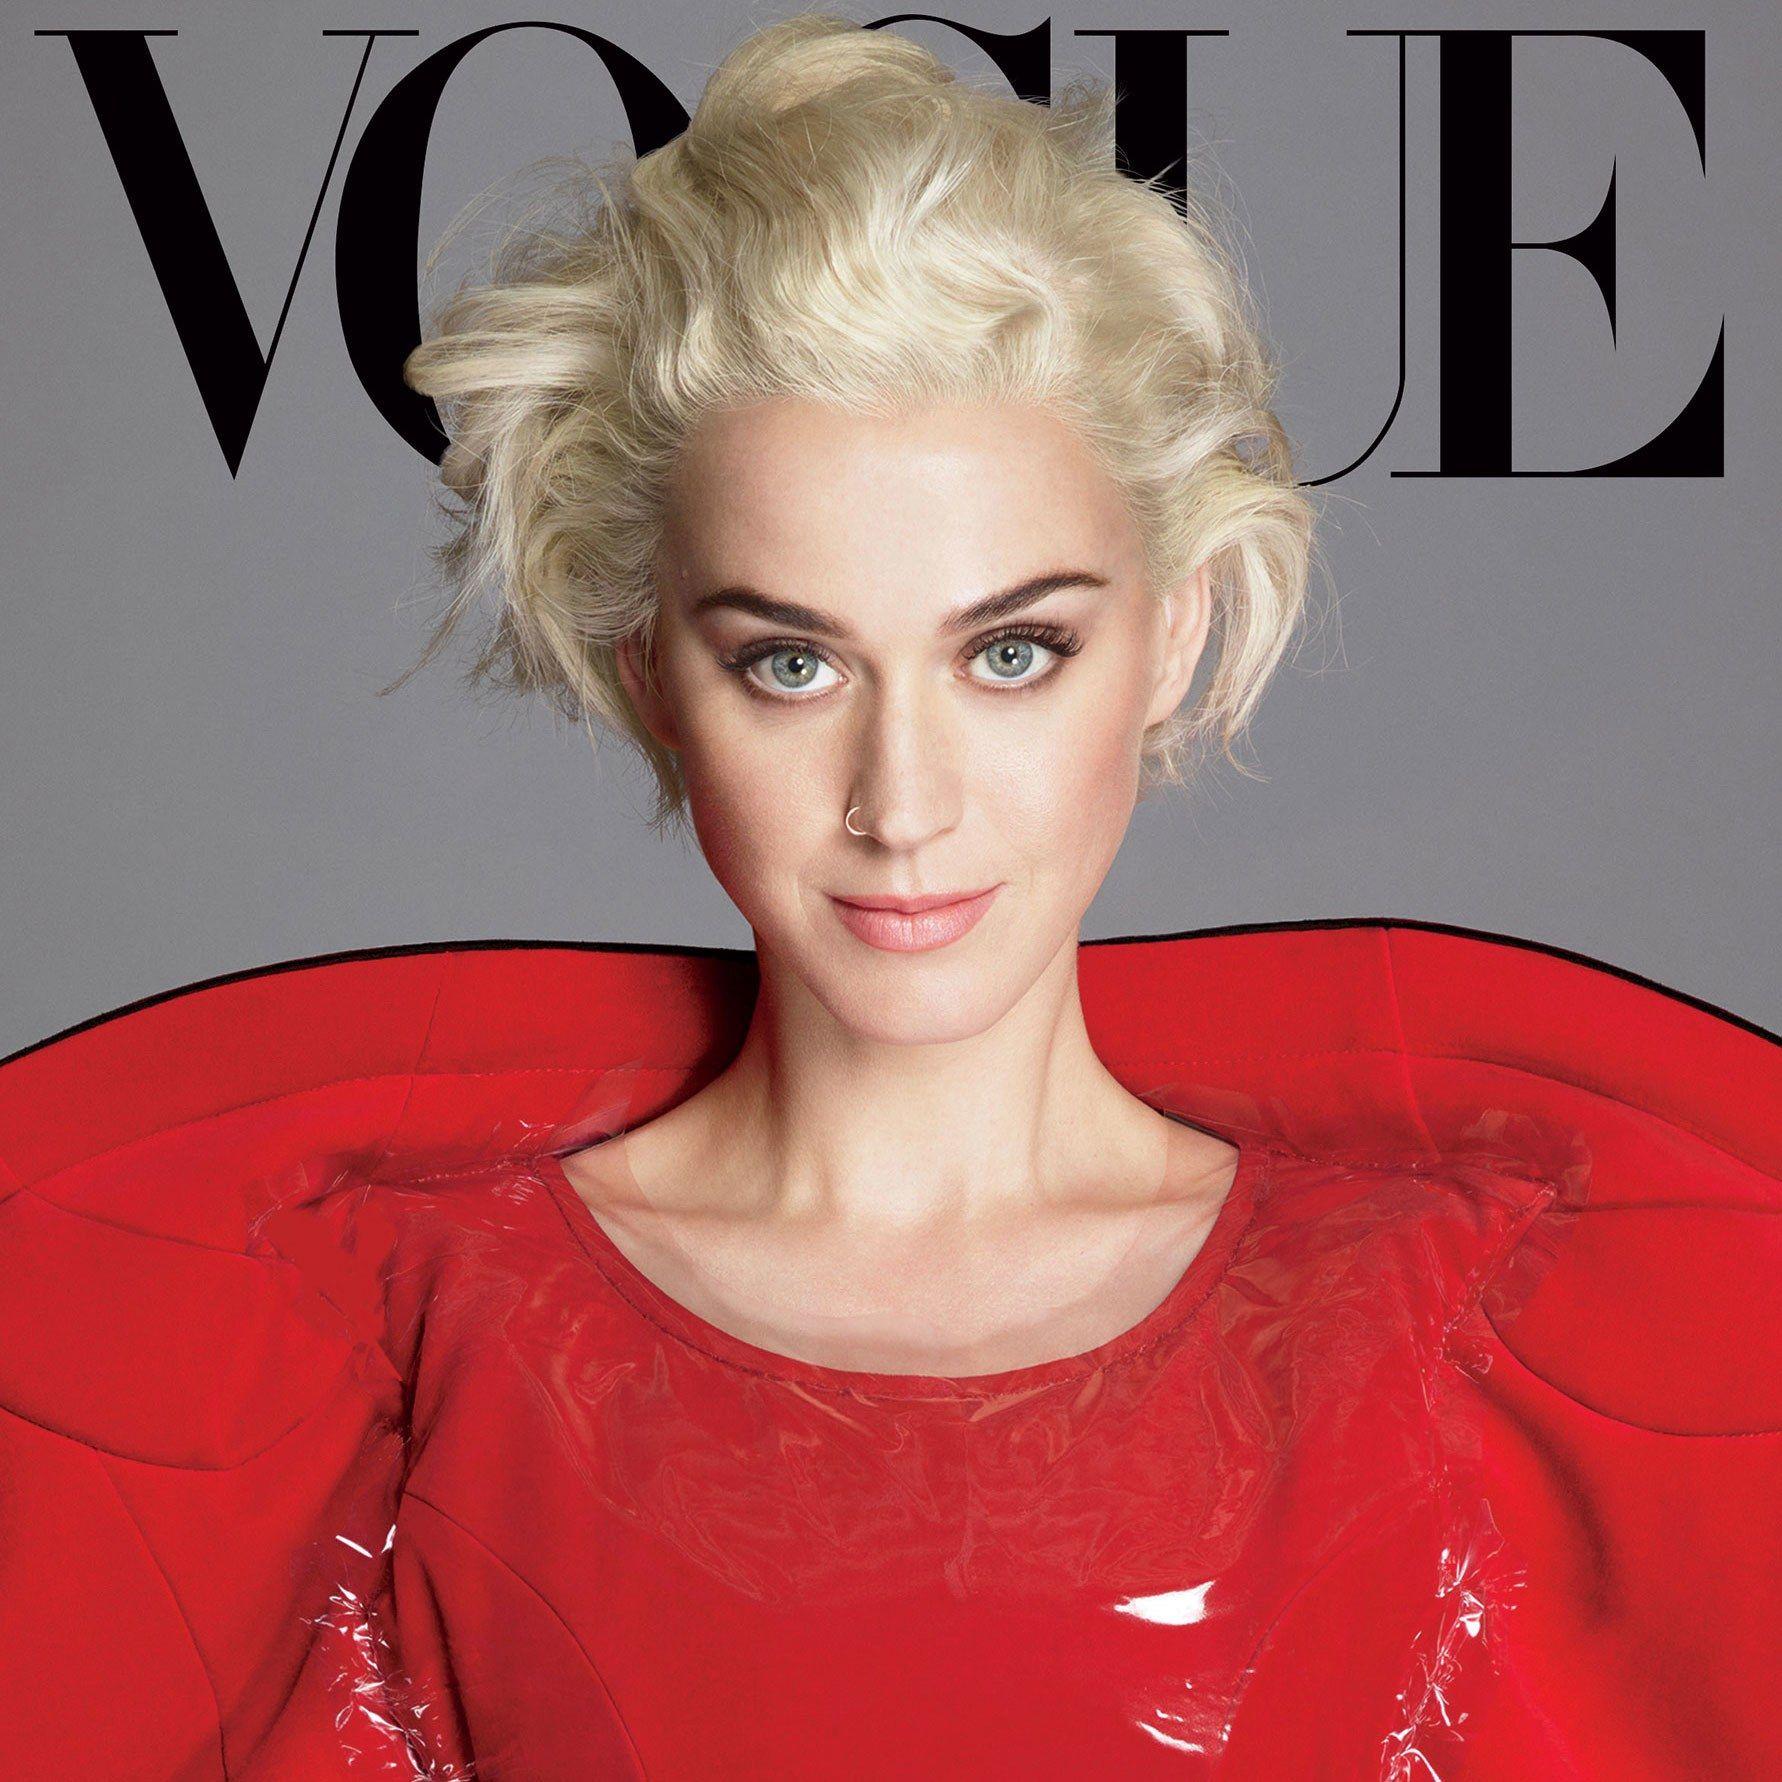 Katy Perry's Vogue Cover: The Star on Her Religious Childhood